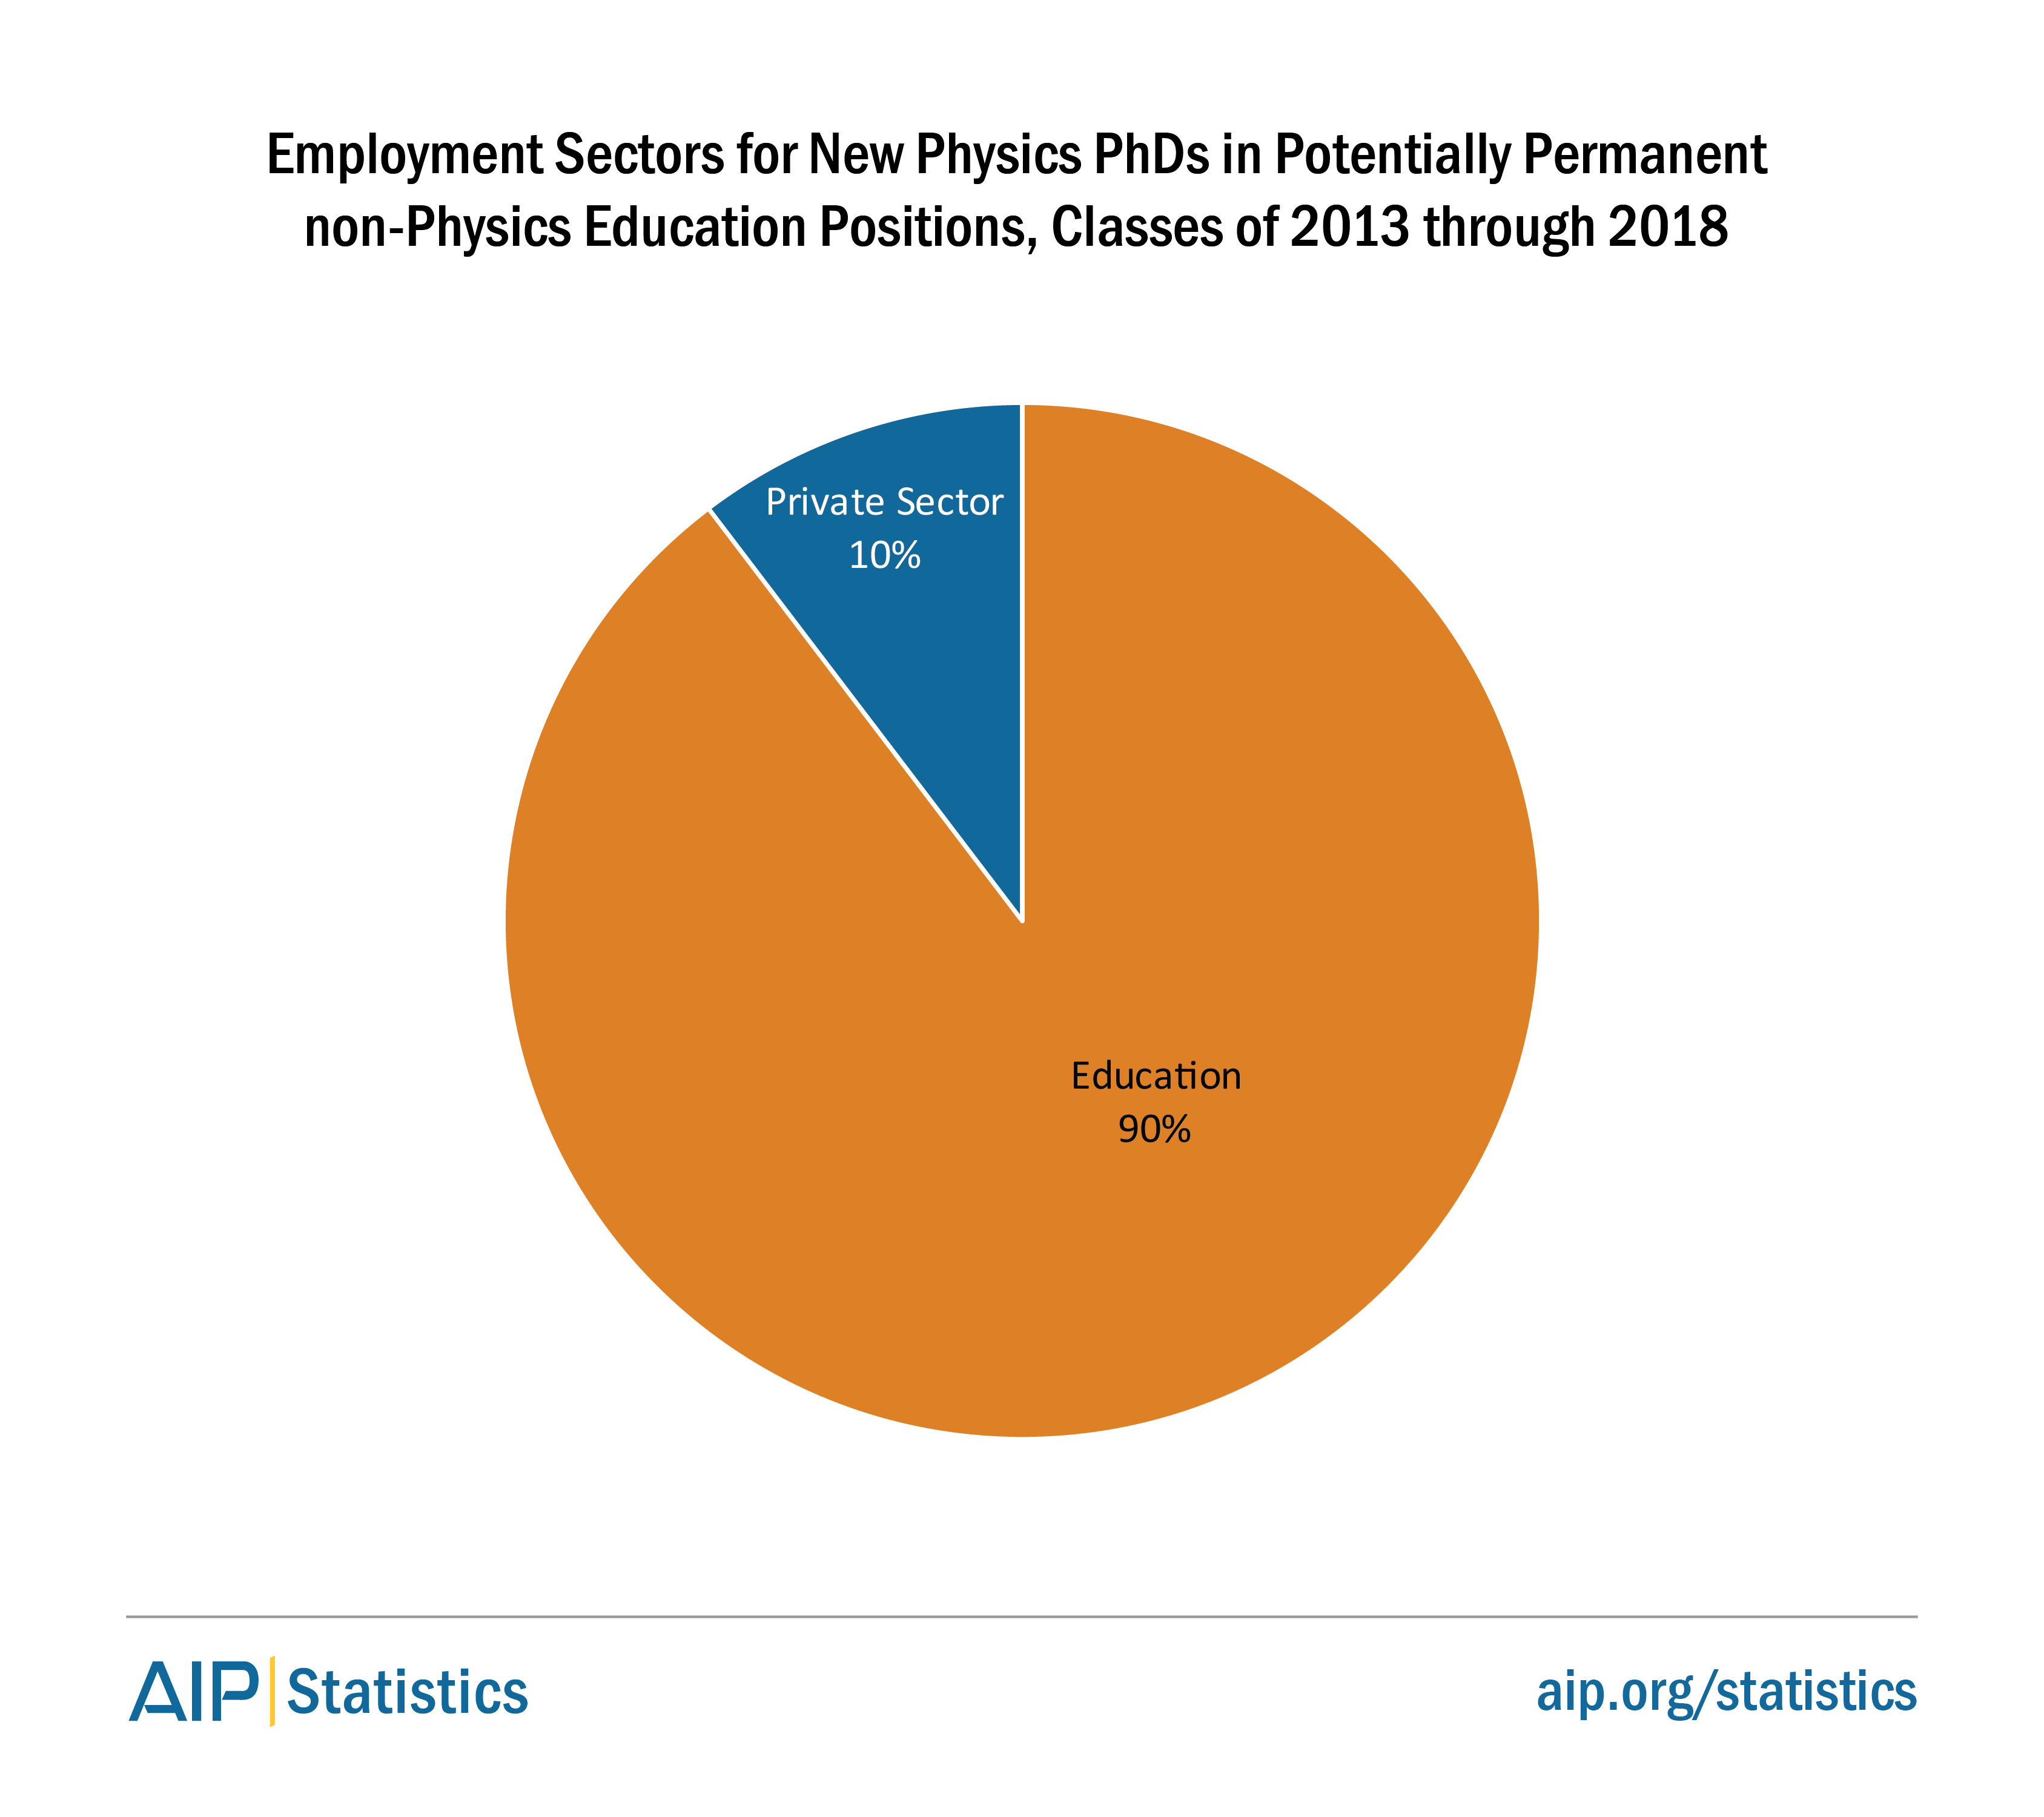 Employment Sectors for Physics PhDs in Non-Physics Education Positions